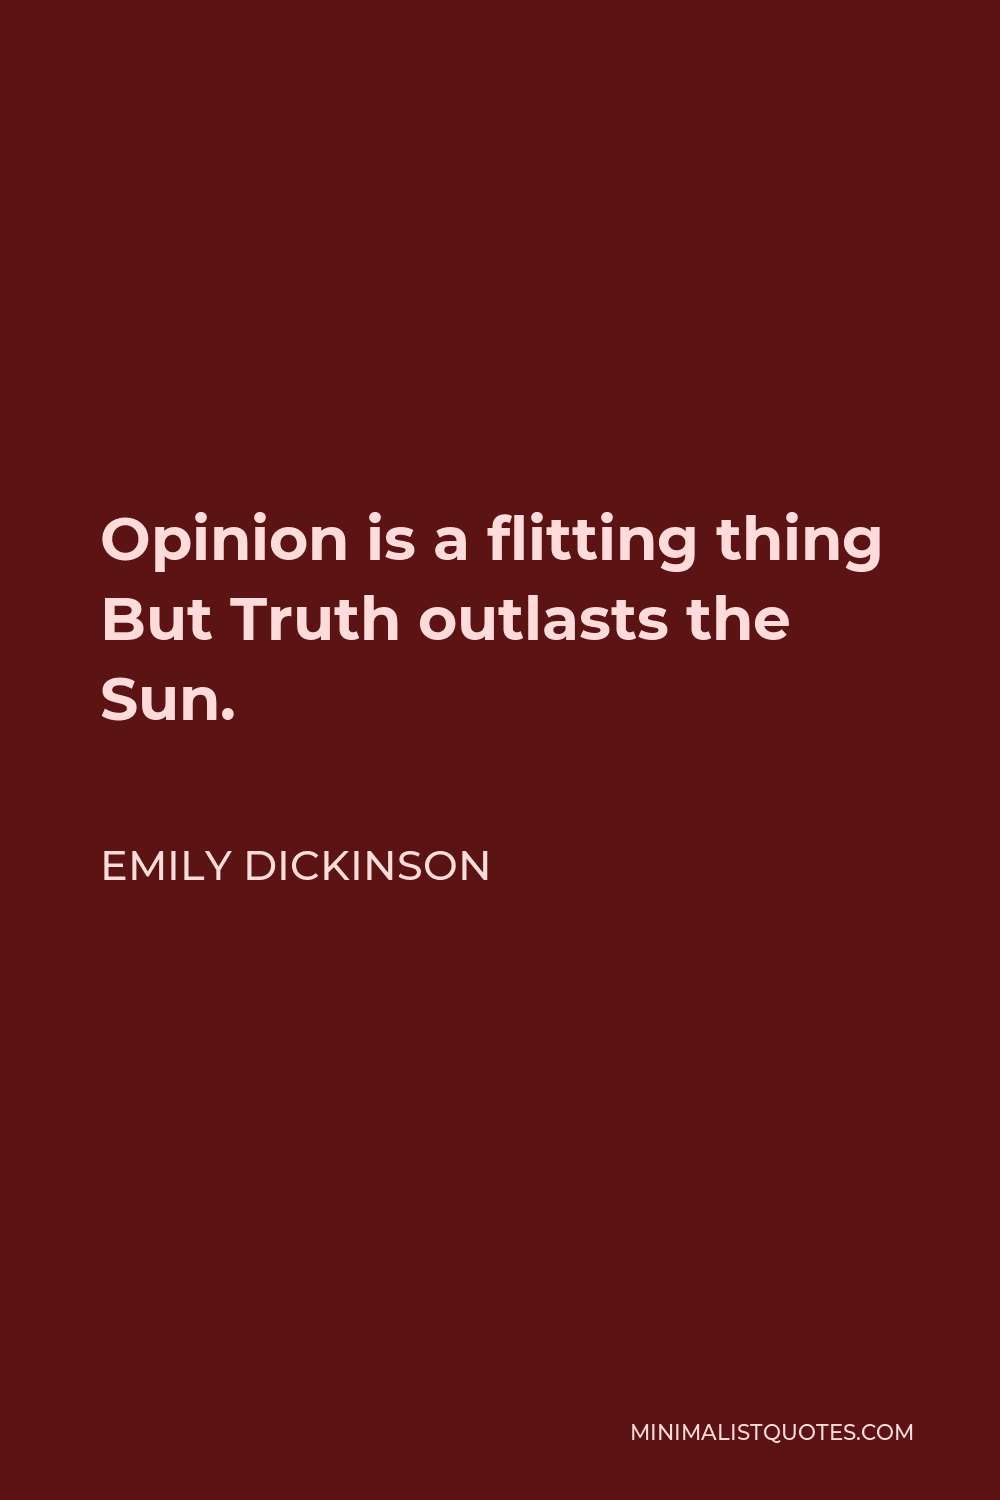 Emily Dickinson Quote - Opinion is a flitting thing But Truth outlasts the Sun.